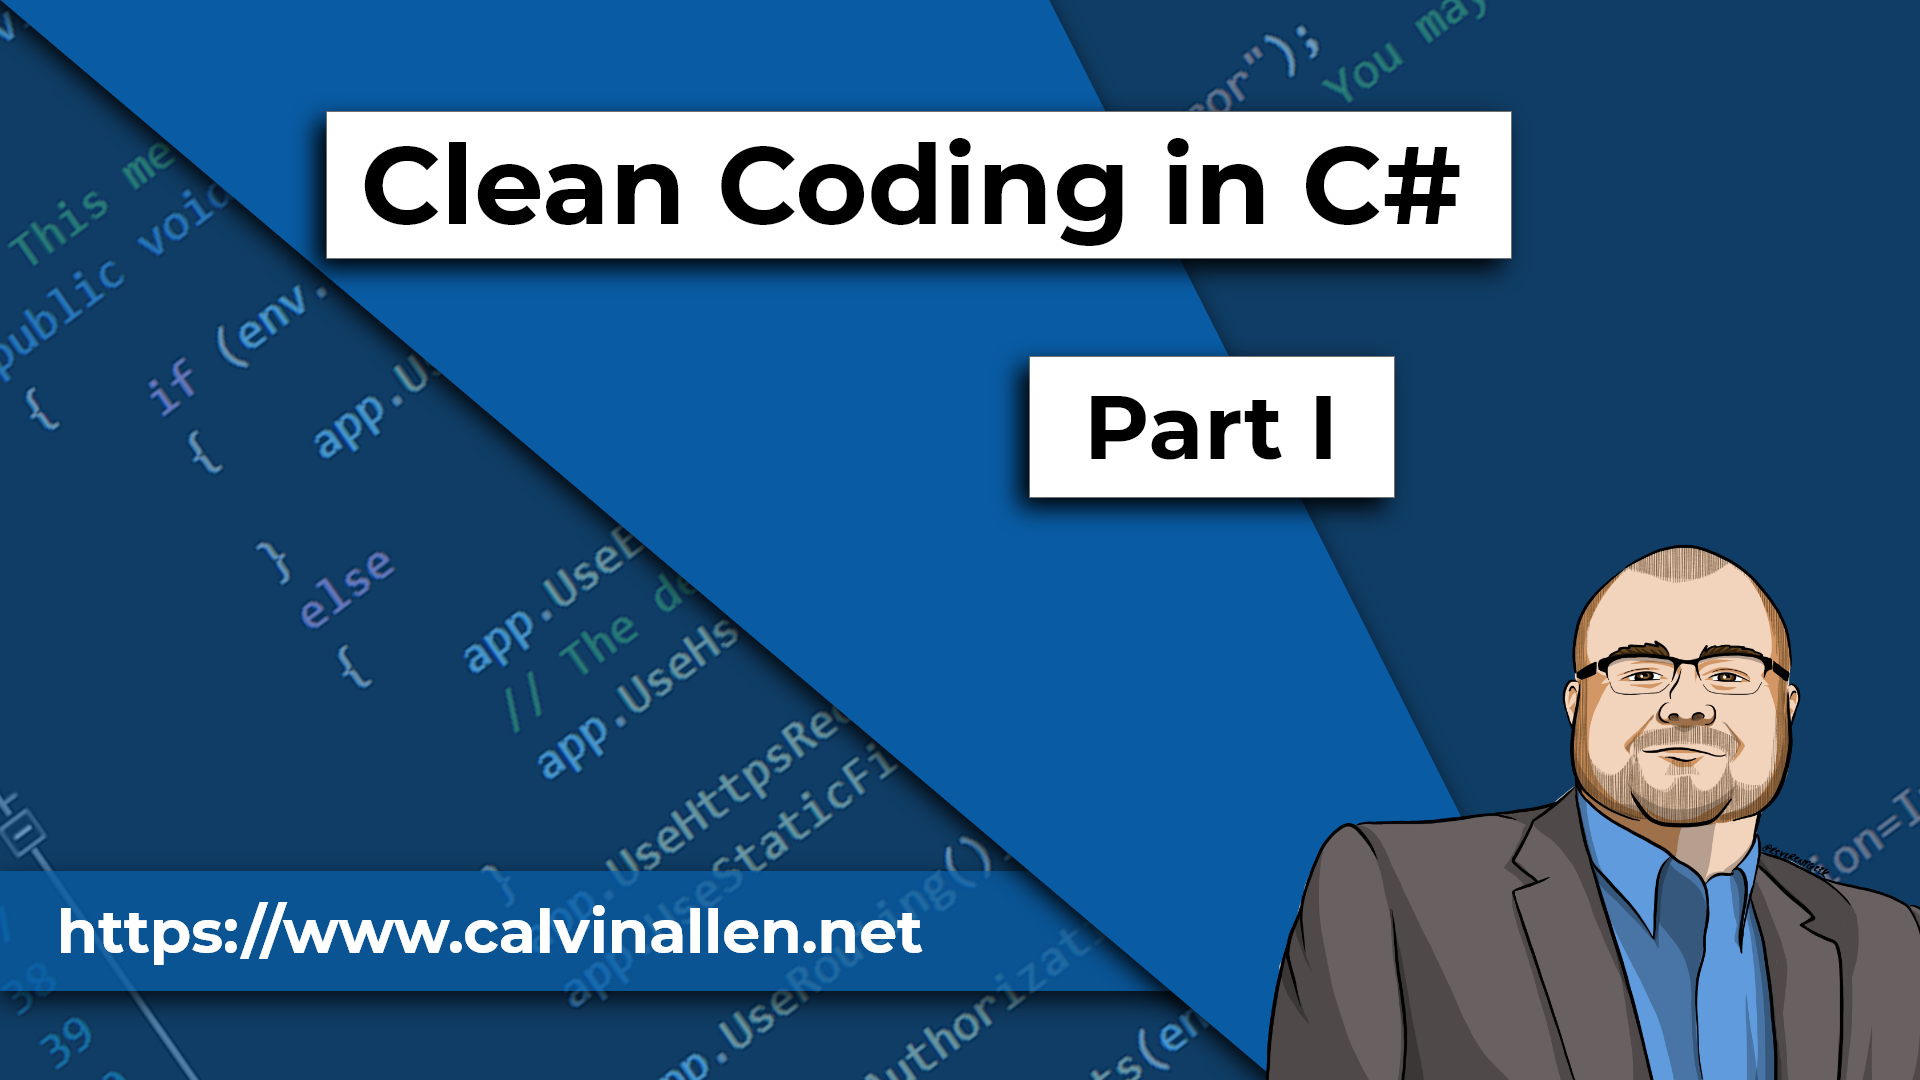 Clean Coding in C# - Part I